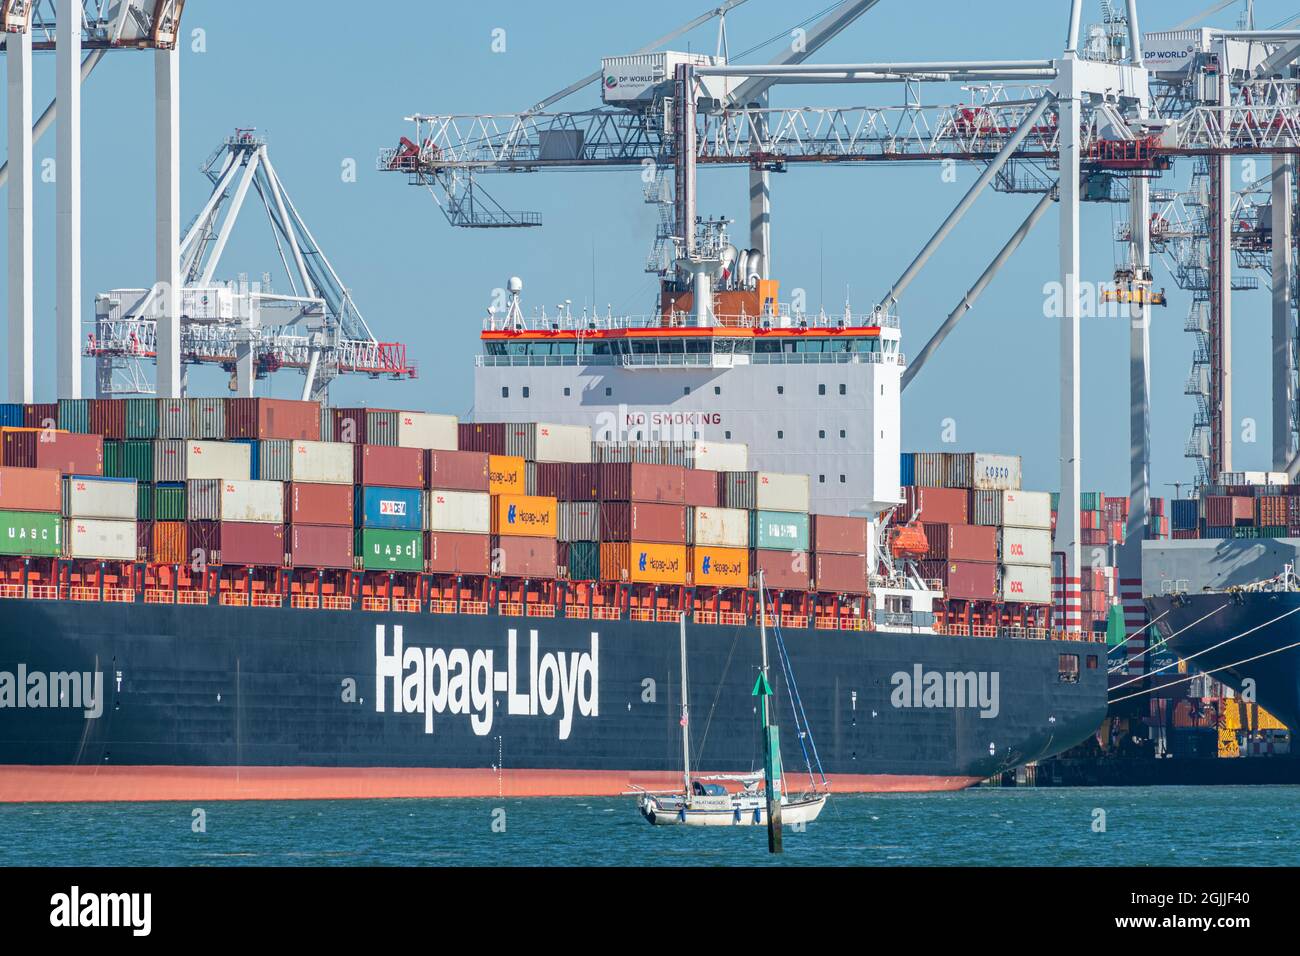 Port of Southampton (Southampton docks) in Hampshire, England, UK. View of a Hapag-Lloyd container ship in the container terminal. Stock Photo